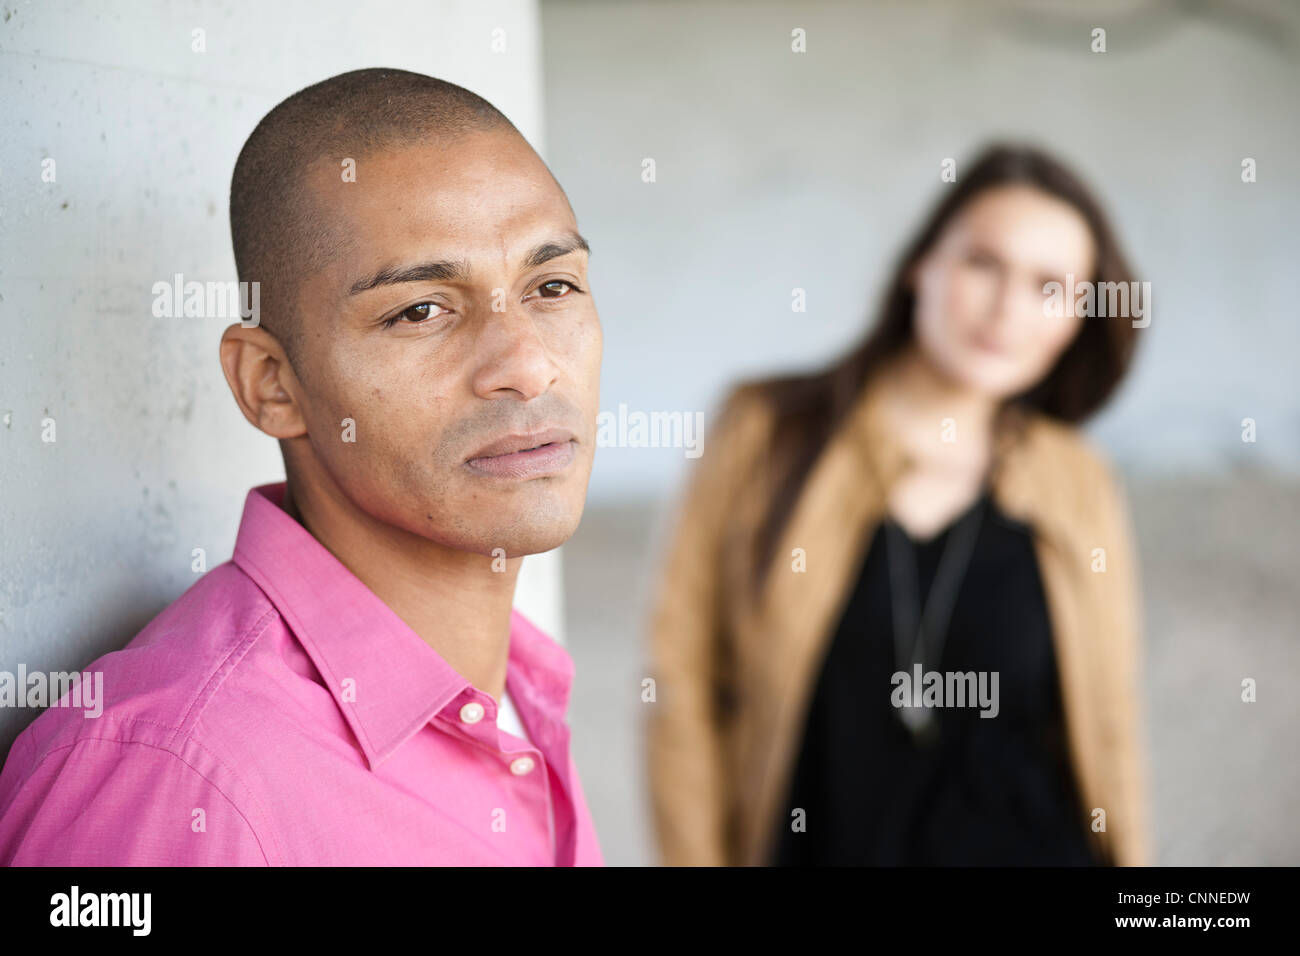 Portrait of Man with Woman in Background Stock Photo